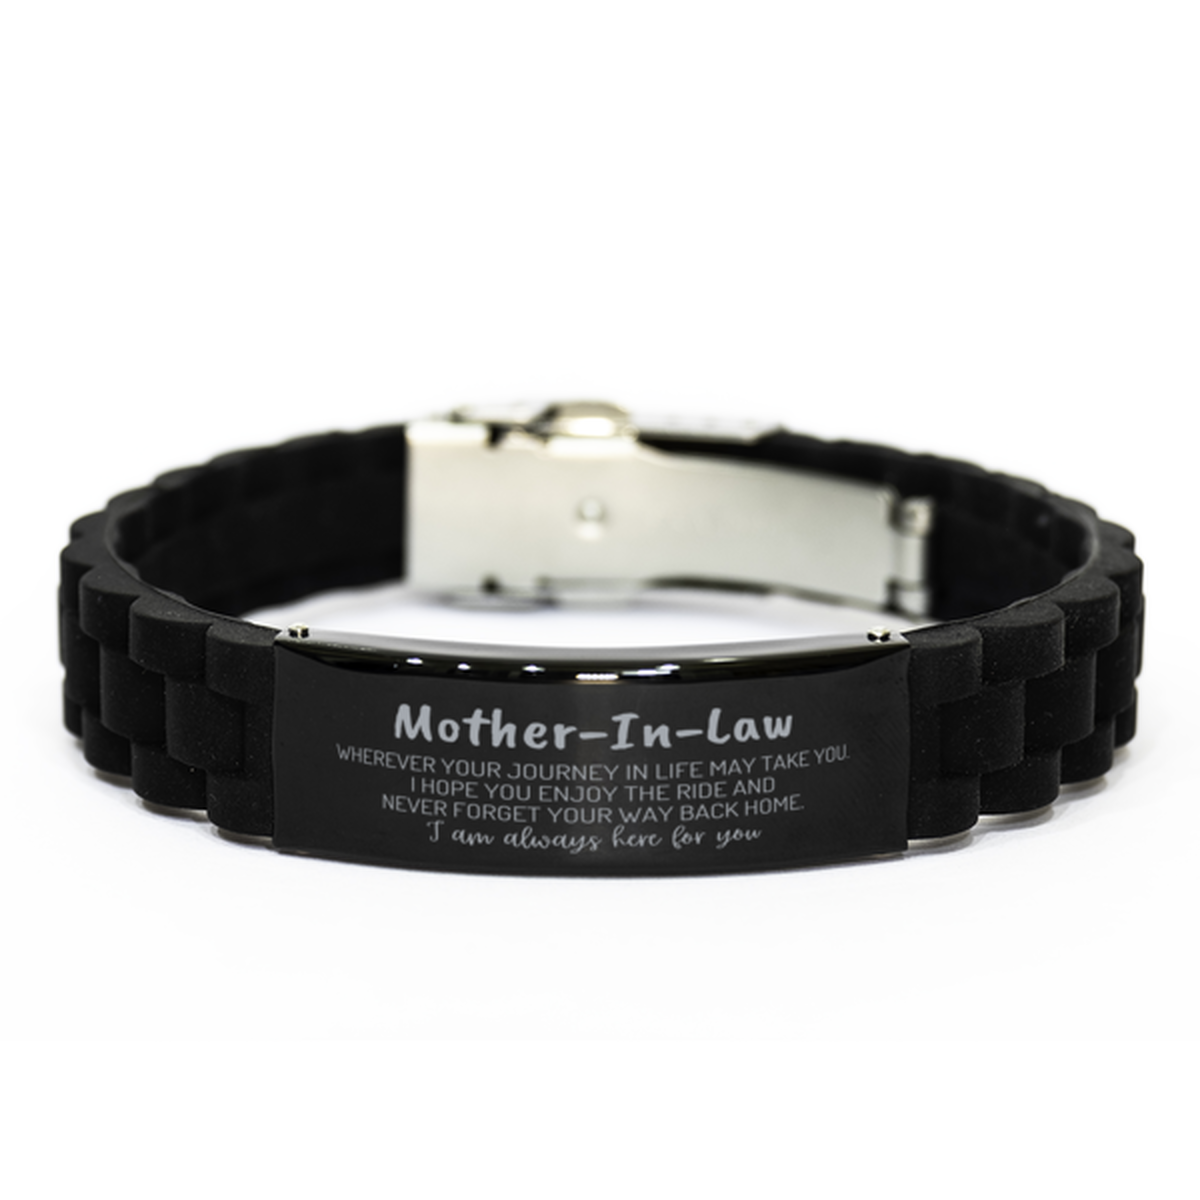 Mother-In-Law wherever your journey in life may take you, I am always here for you Mother-In-Law Black Glidelock Clasp Bracelet, Awesome Christmas Gifts For Mother-In-Law, Mother-In-Law Birthday Gifts for Men Women Family Loved One